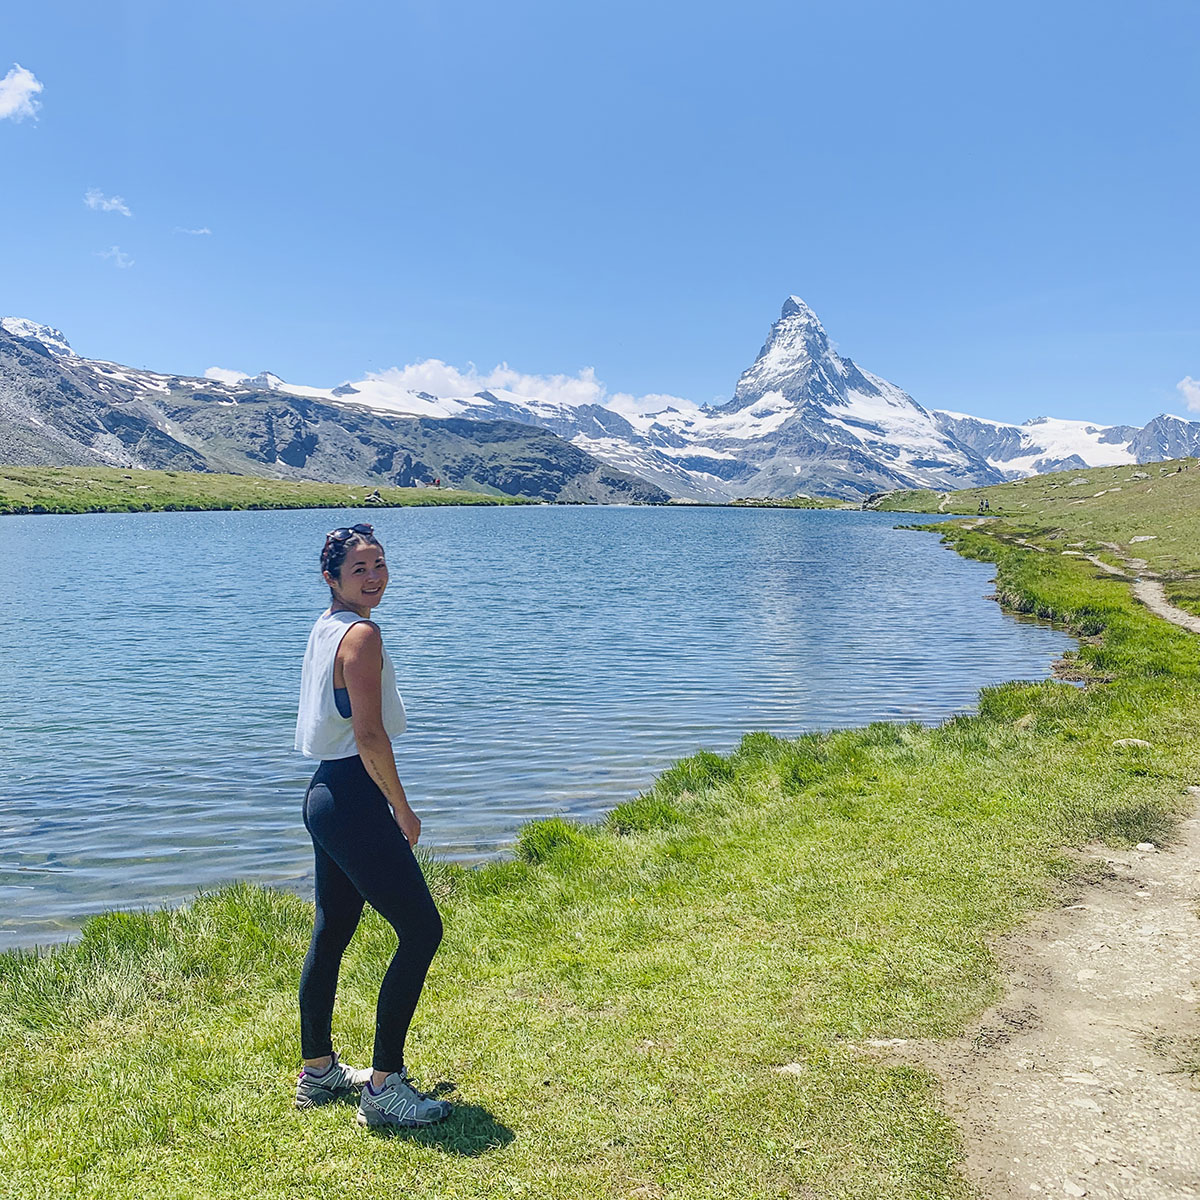 Student standing by body of water with mountain in background